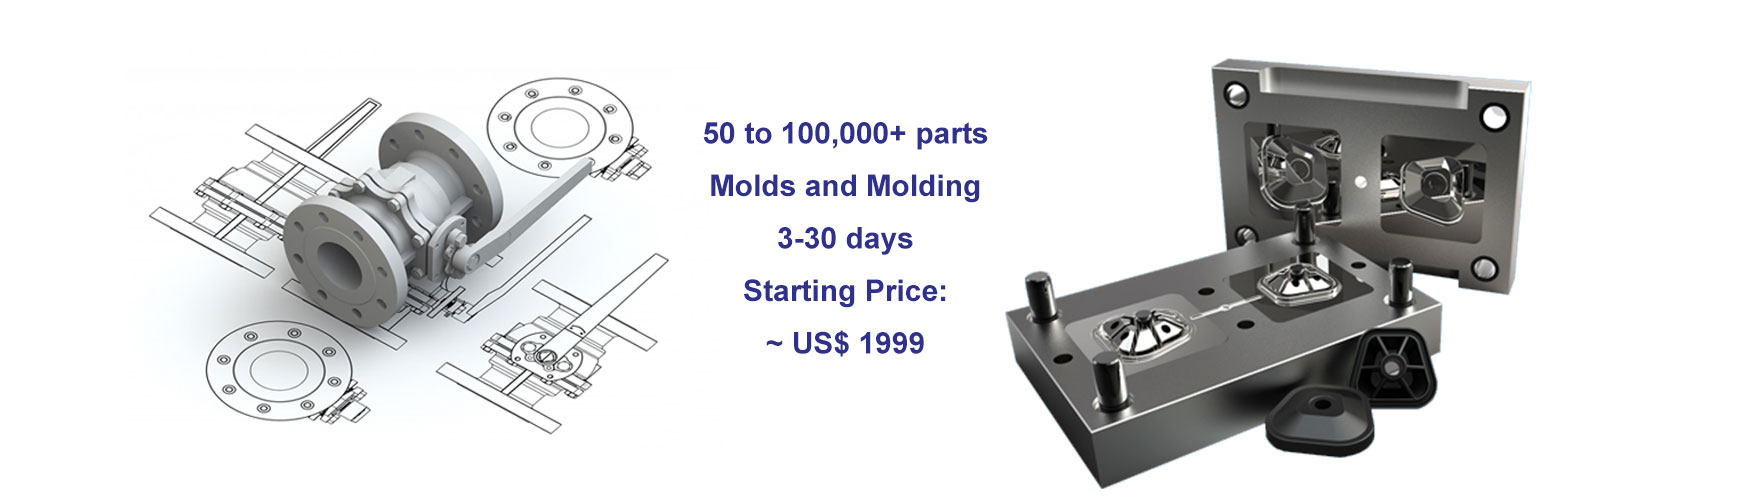 50 to 100,000+ parts Molds and Molding 3-30 days Starting Price: ~ US$ 1999